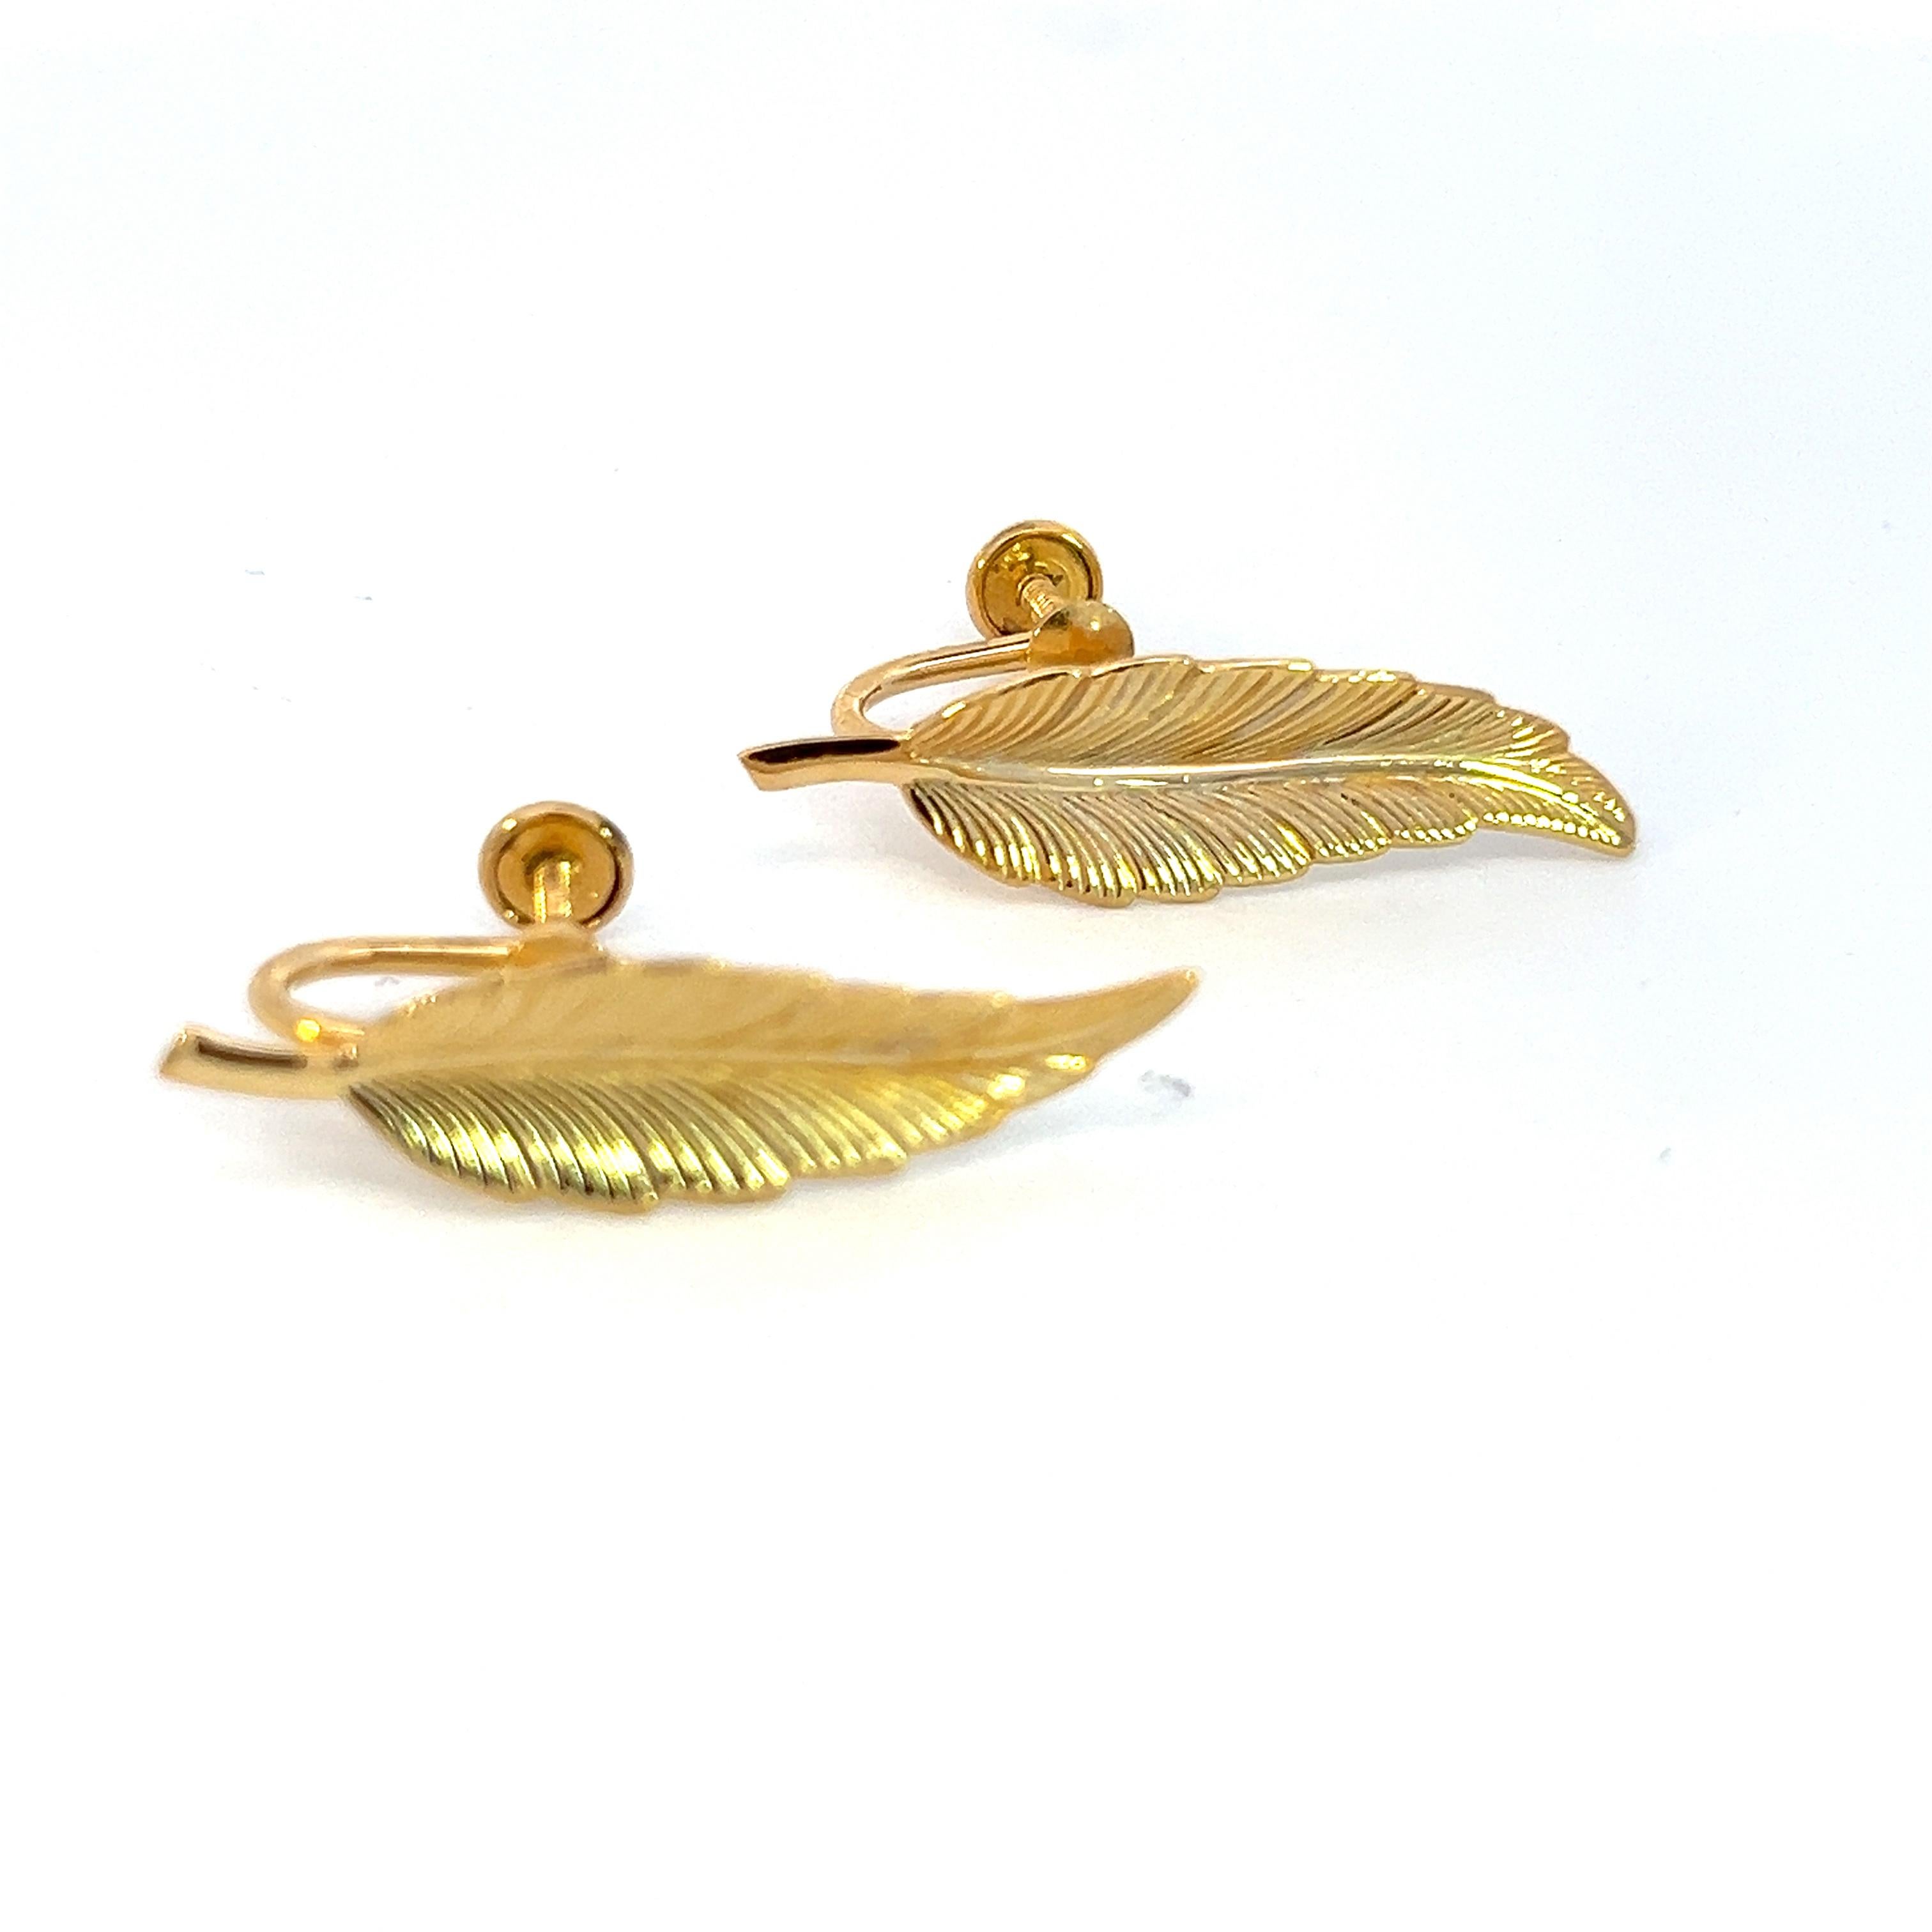 Authentic Tiffany & Co Estate Leaf Earrings Clip-on 14k Gold Plated TIF550

These elegant Authentic Tiffany & Co earrings have a weight of 3.6 Grams.

TRUSTED SELLER SINCE 2002

PLEASE SEE OUR HUNDREDS OF POSITIVE FEEDBACKS FROM OUR CLIENTS!!

FREE